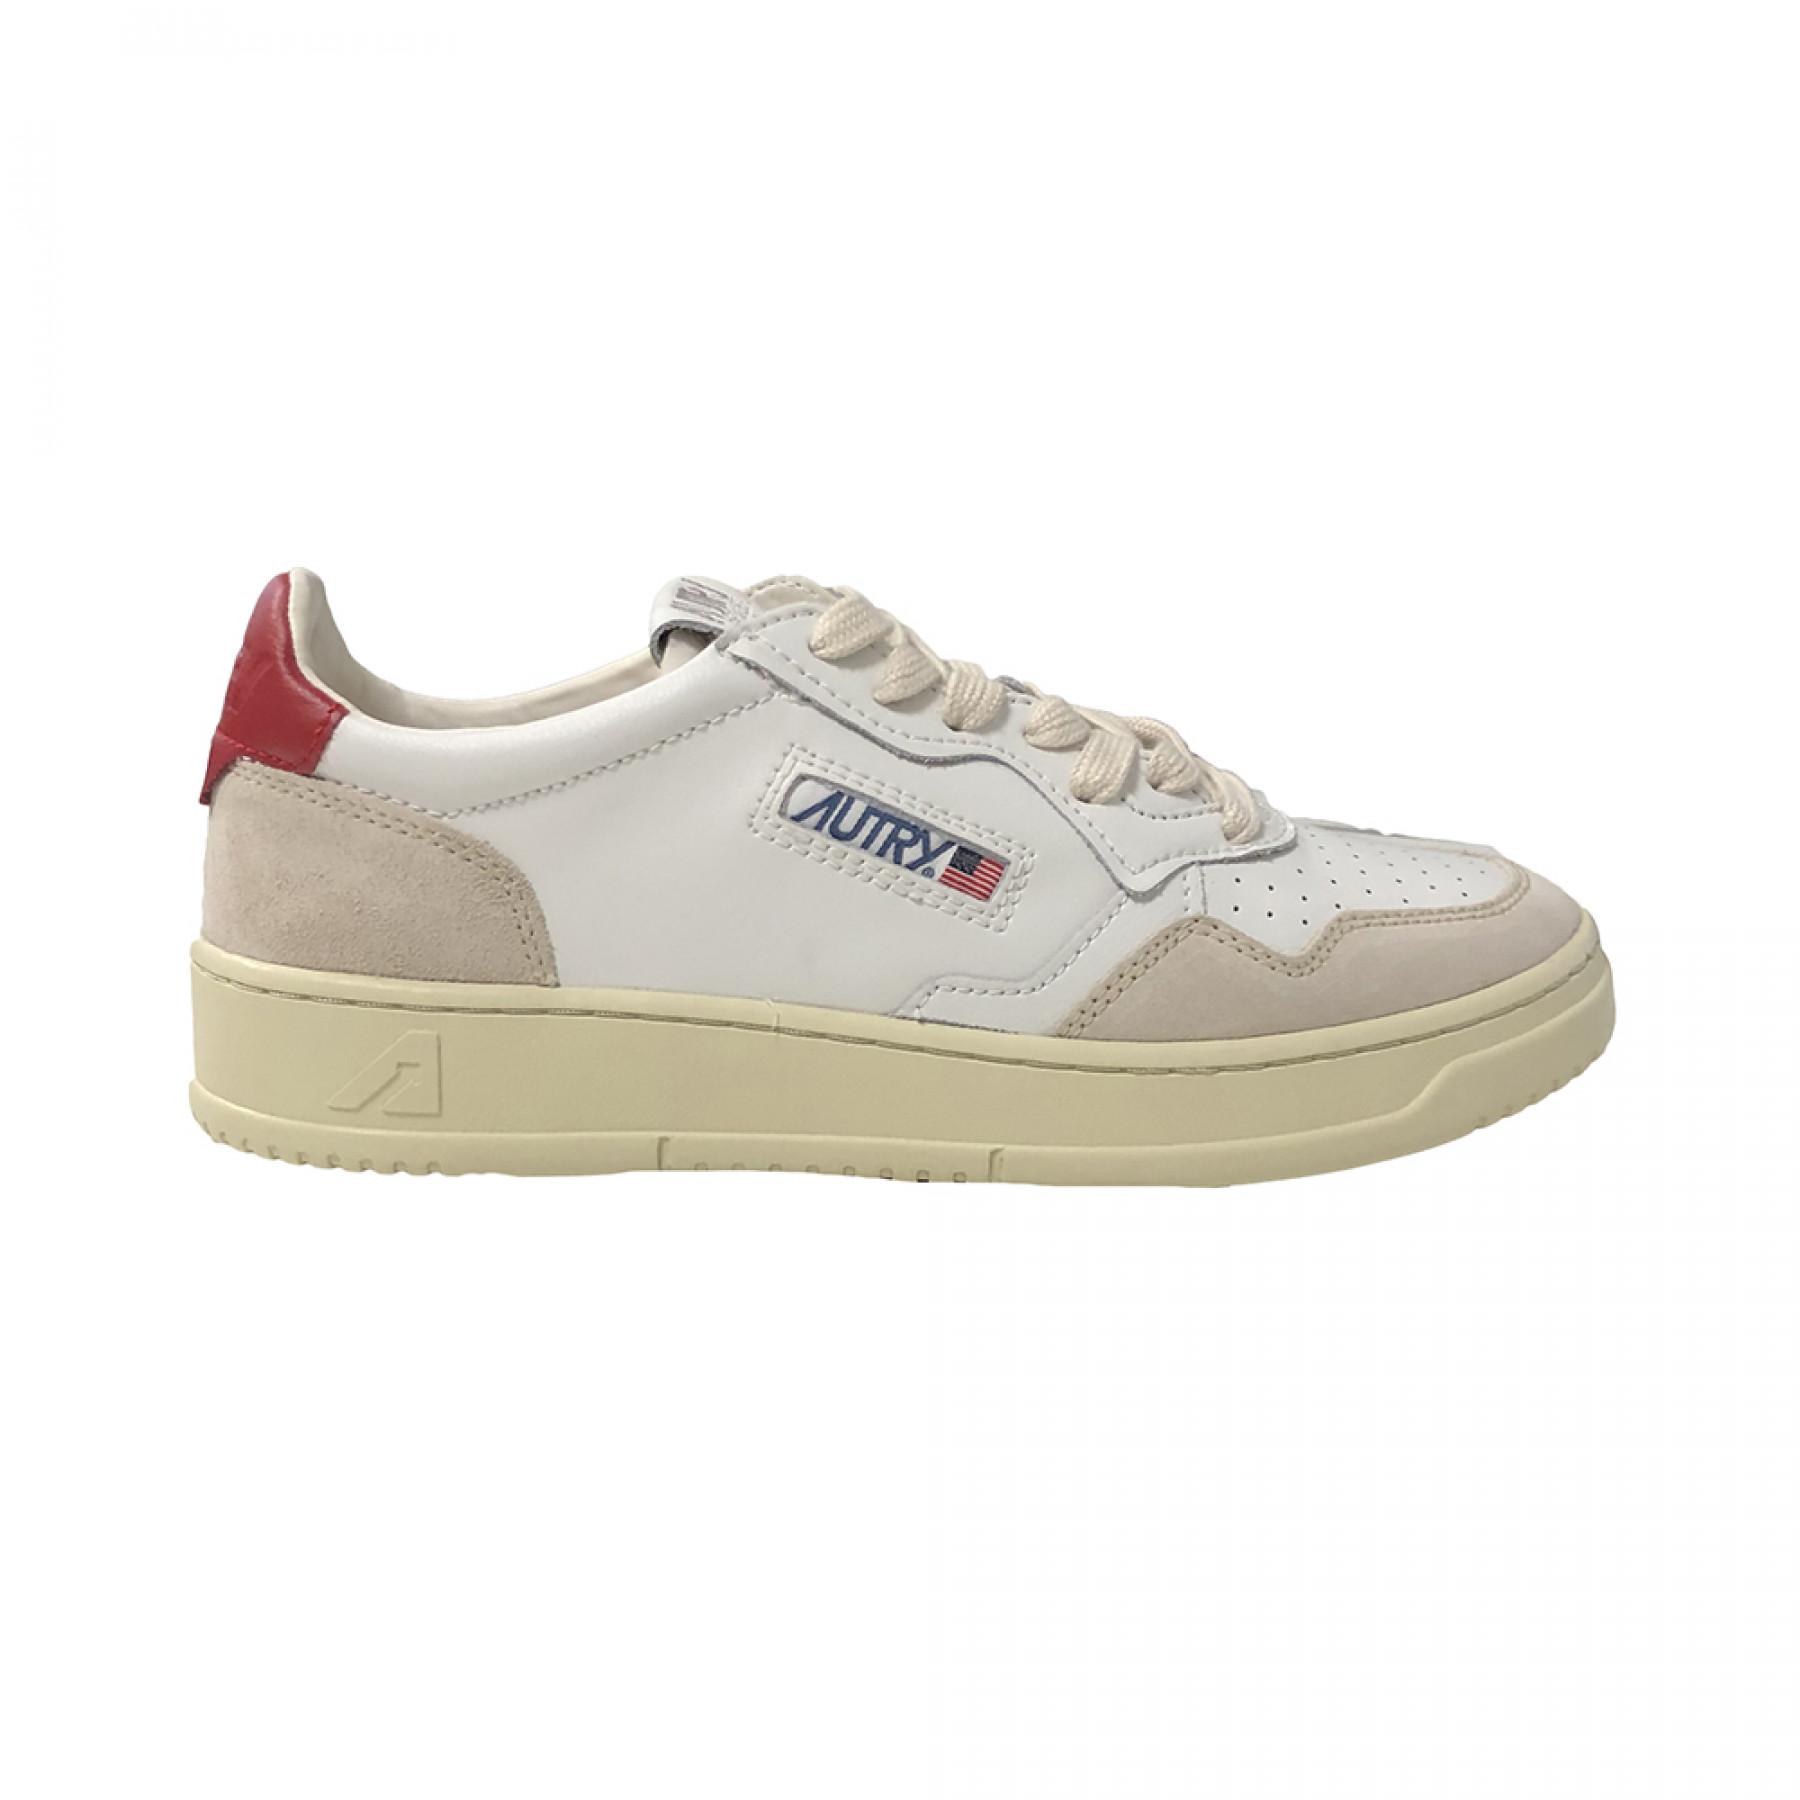 Formadores Autry Medalist LS29 Leather/Suede White/Red